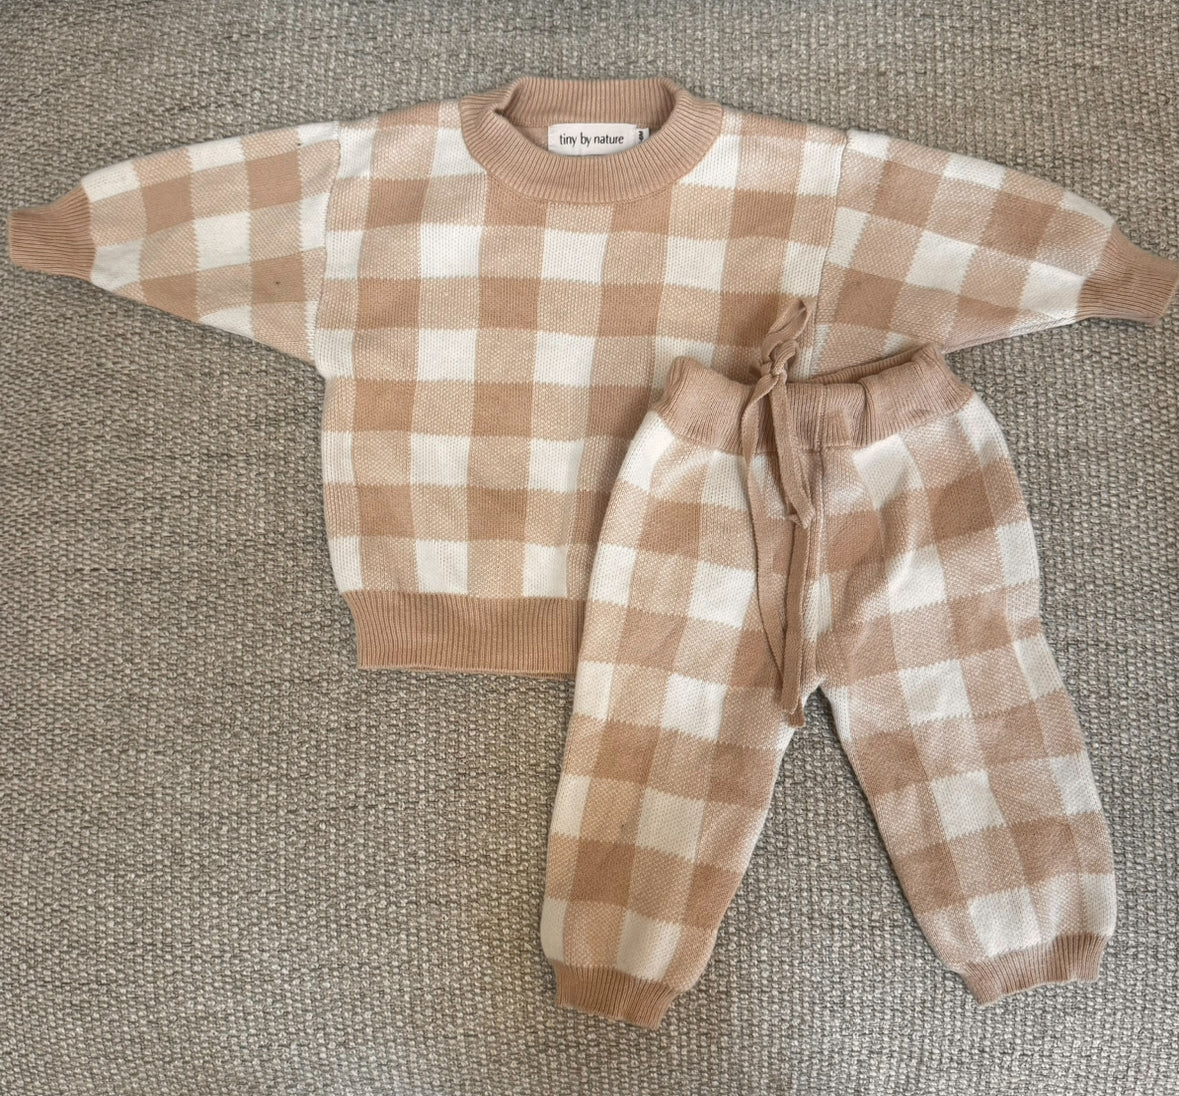 Tiny By Nature 3-6 month gingham neutral knit baby set VGUC